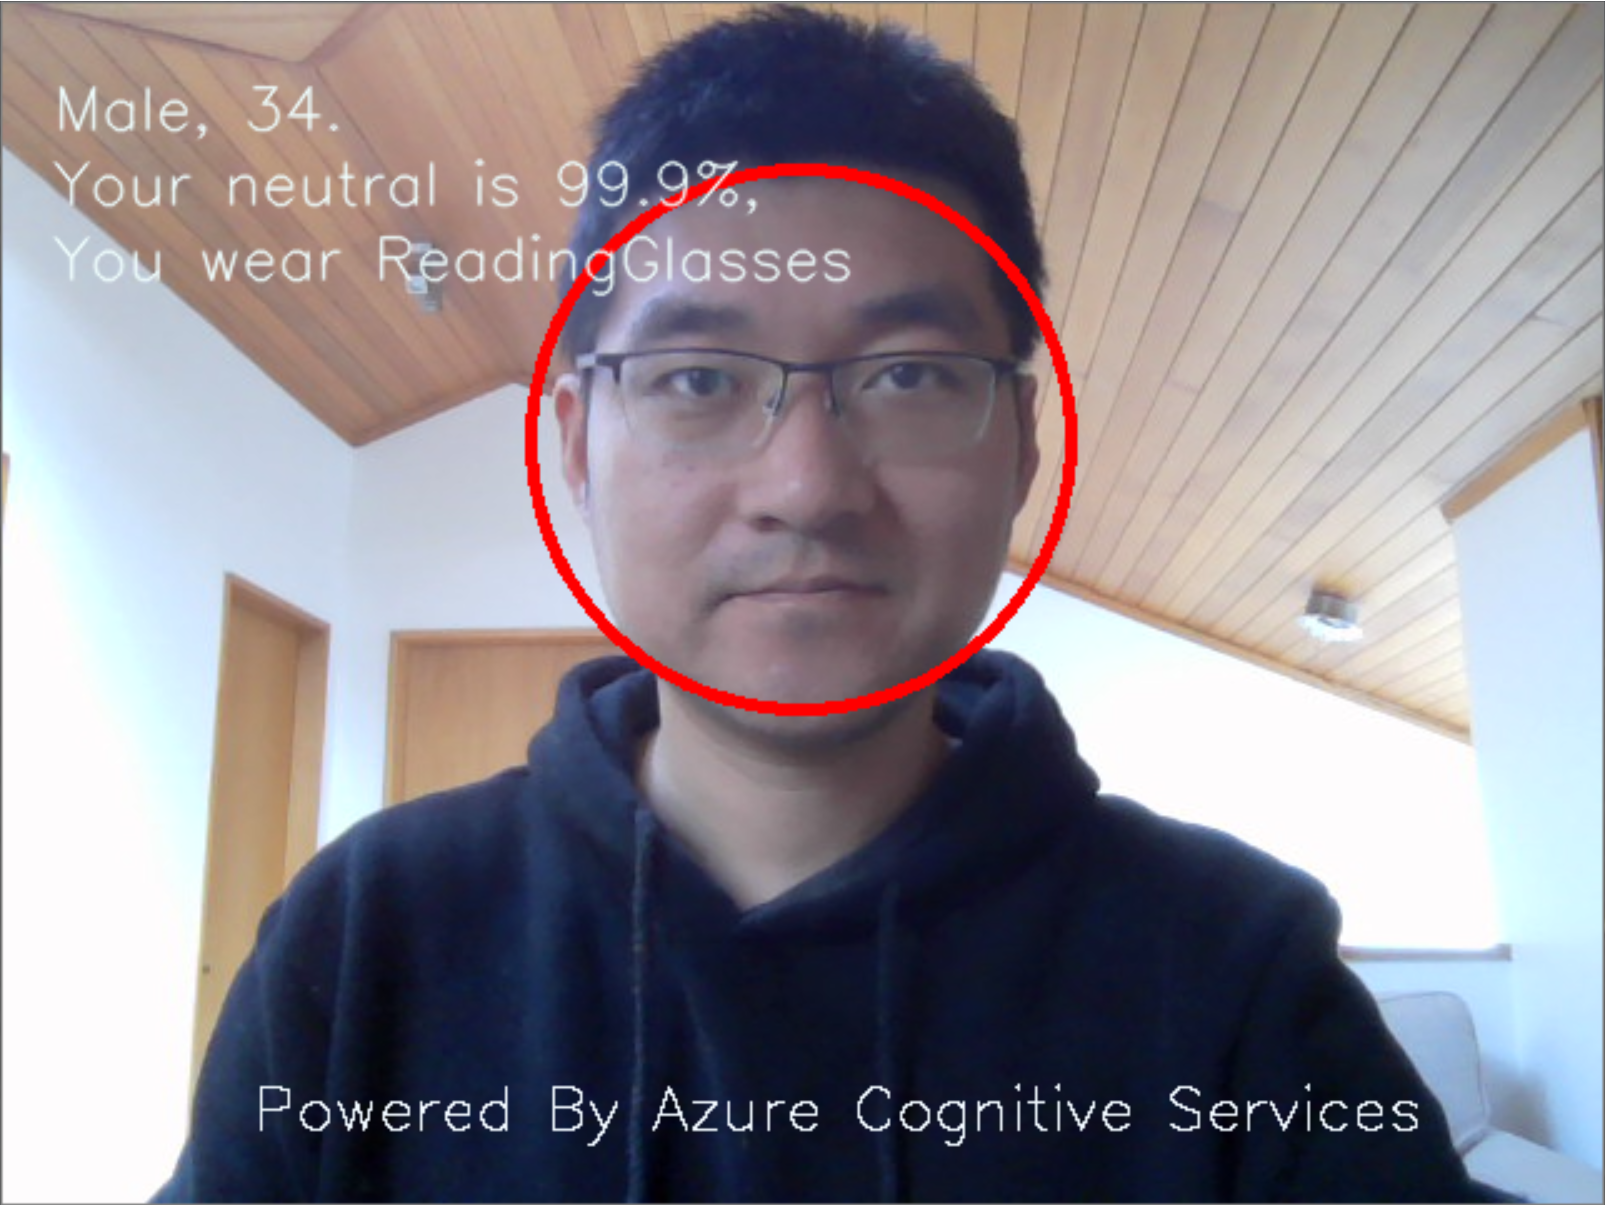 My Face Recognition app powered by Azure Cognitive Services